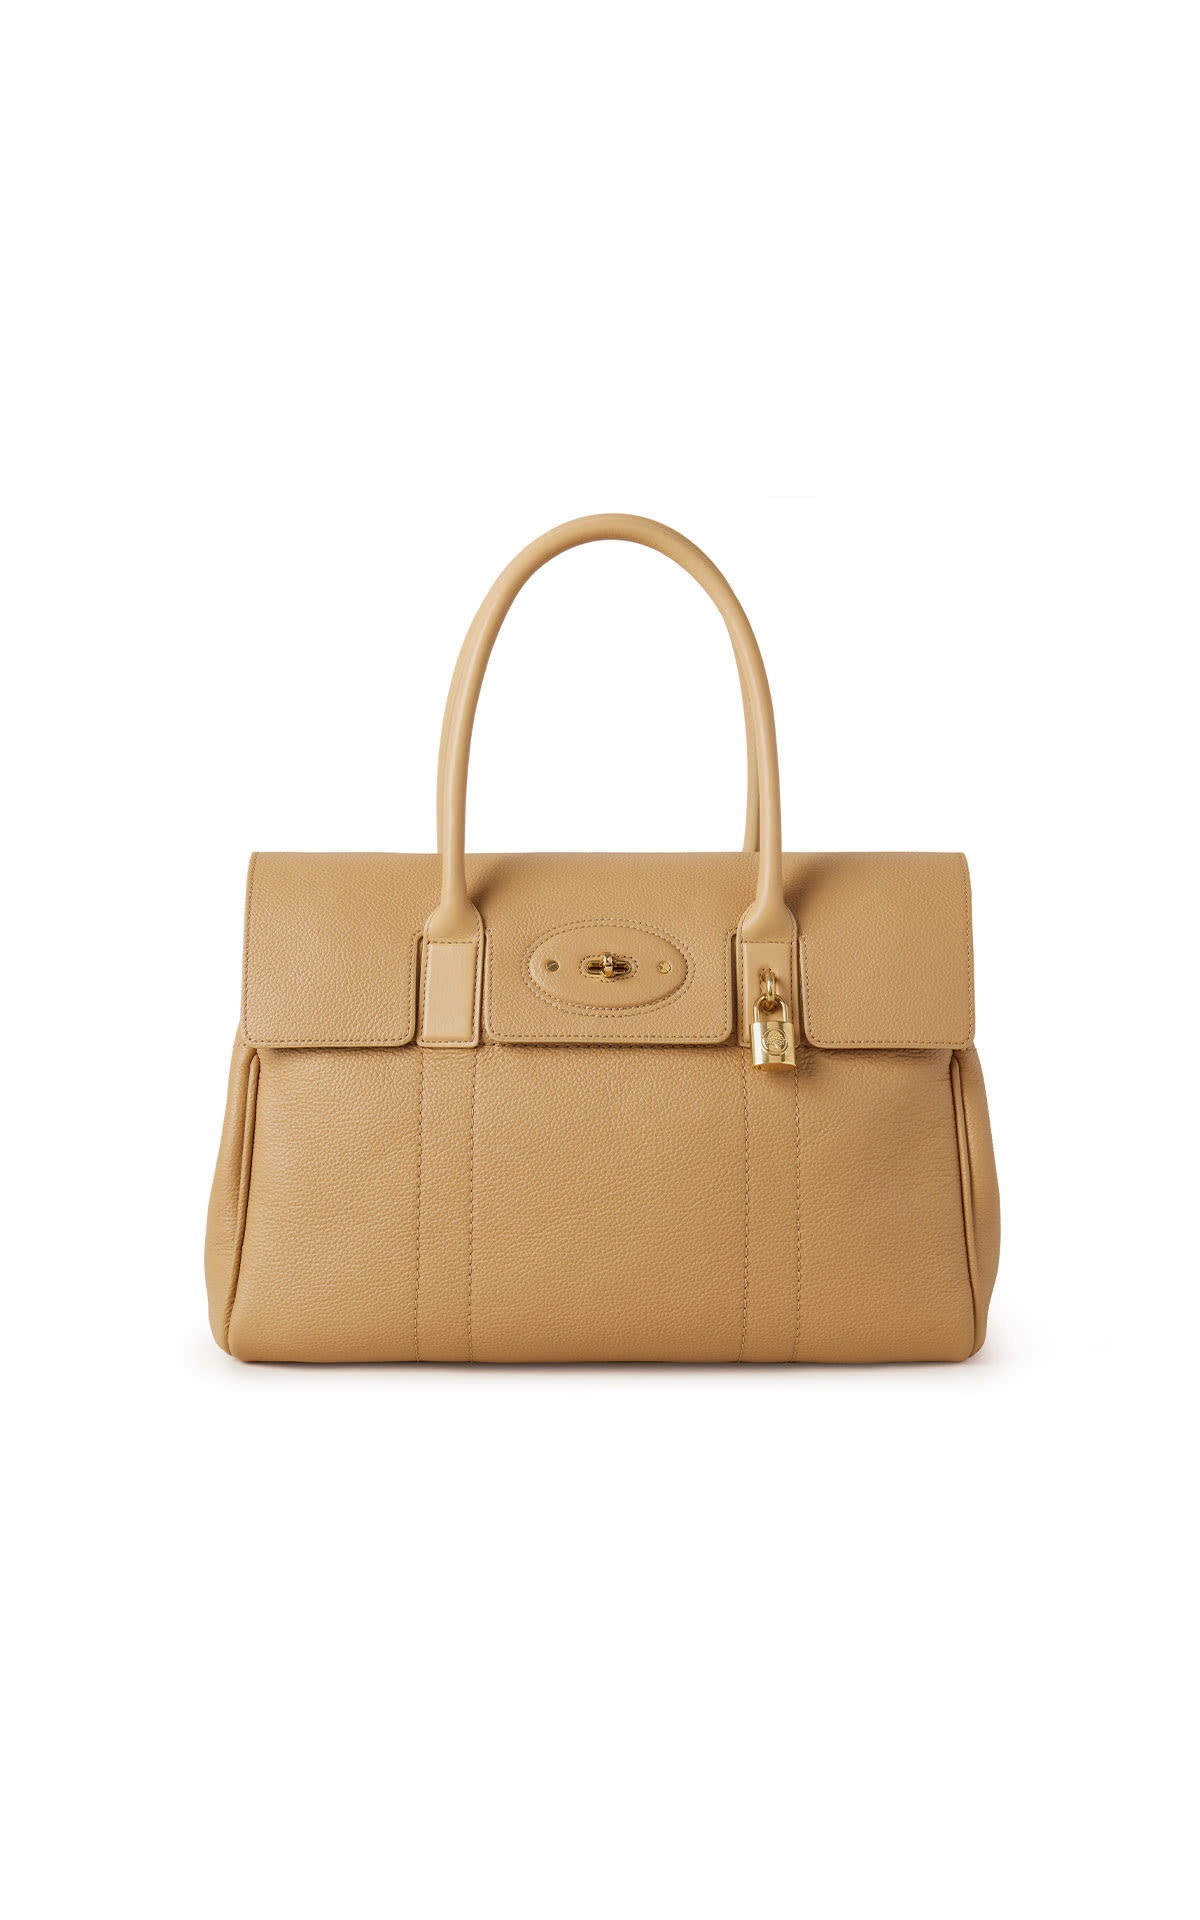 Mulberry Bayswater classic grain tote from Bicester Village